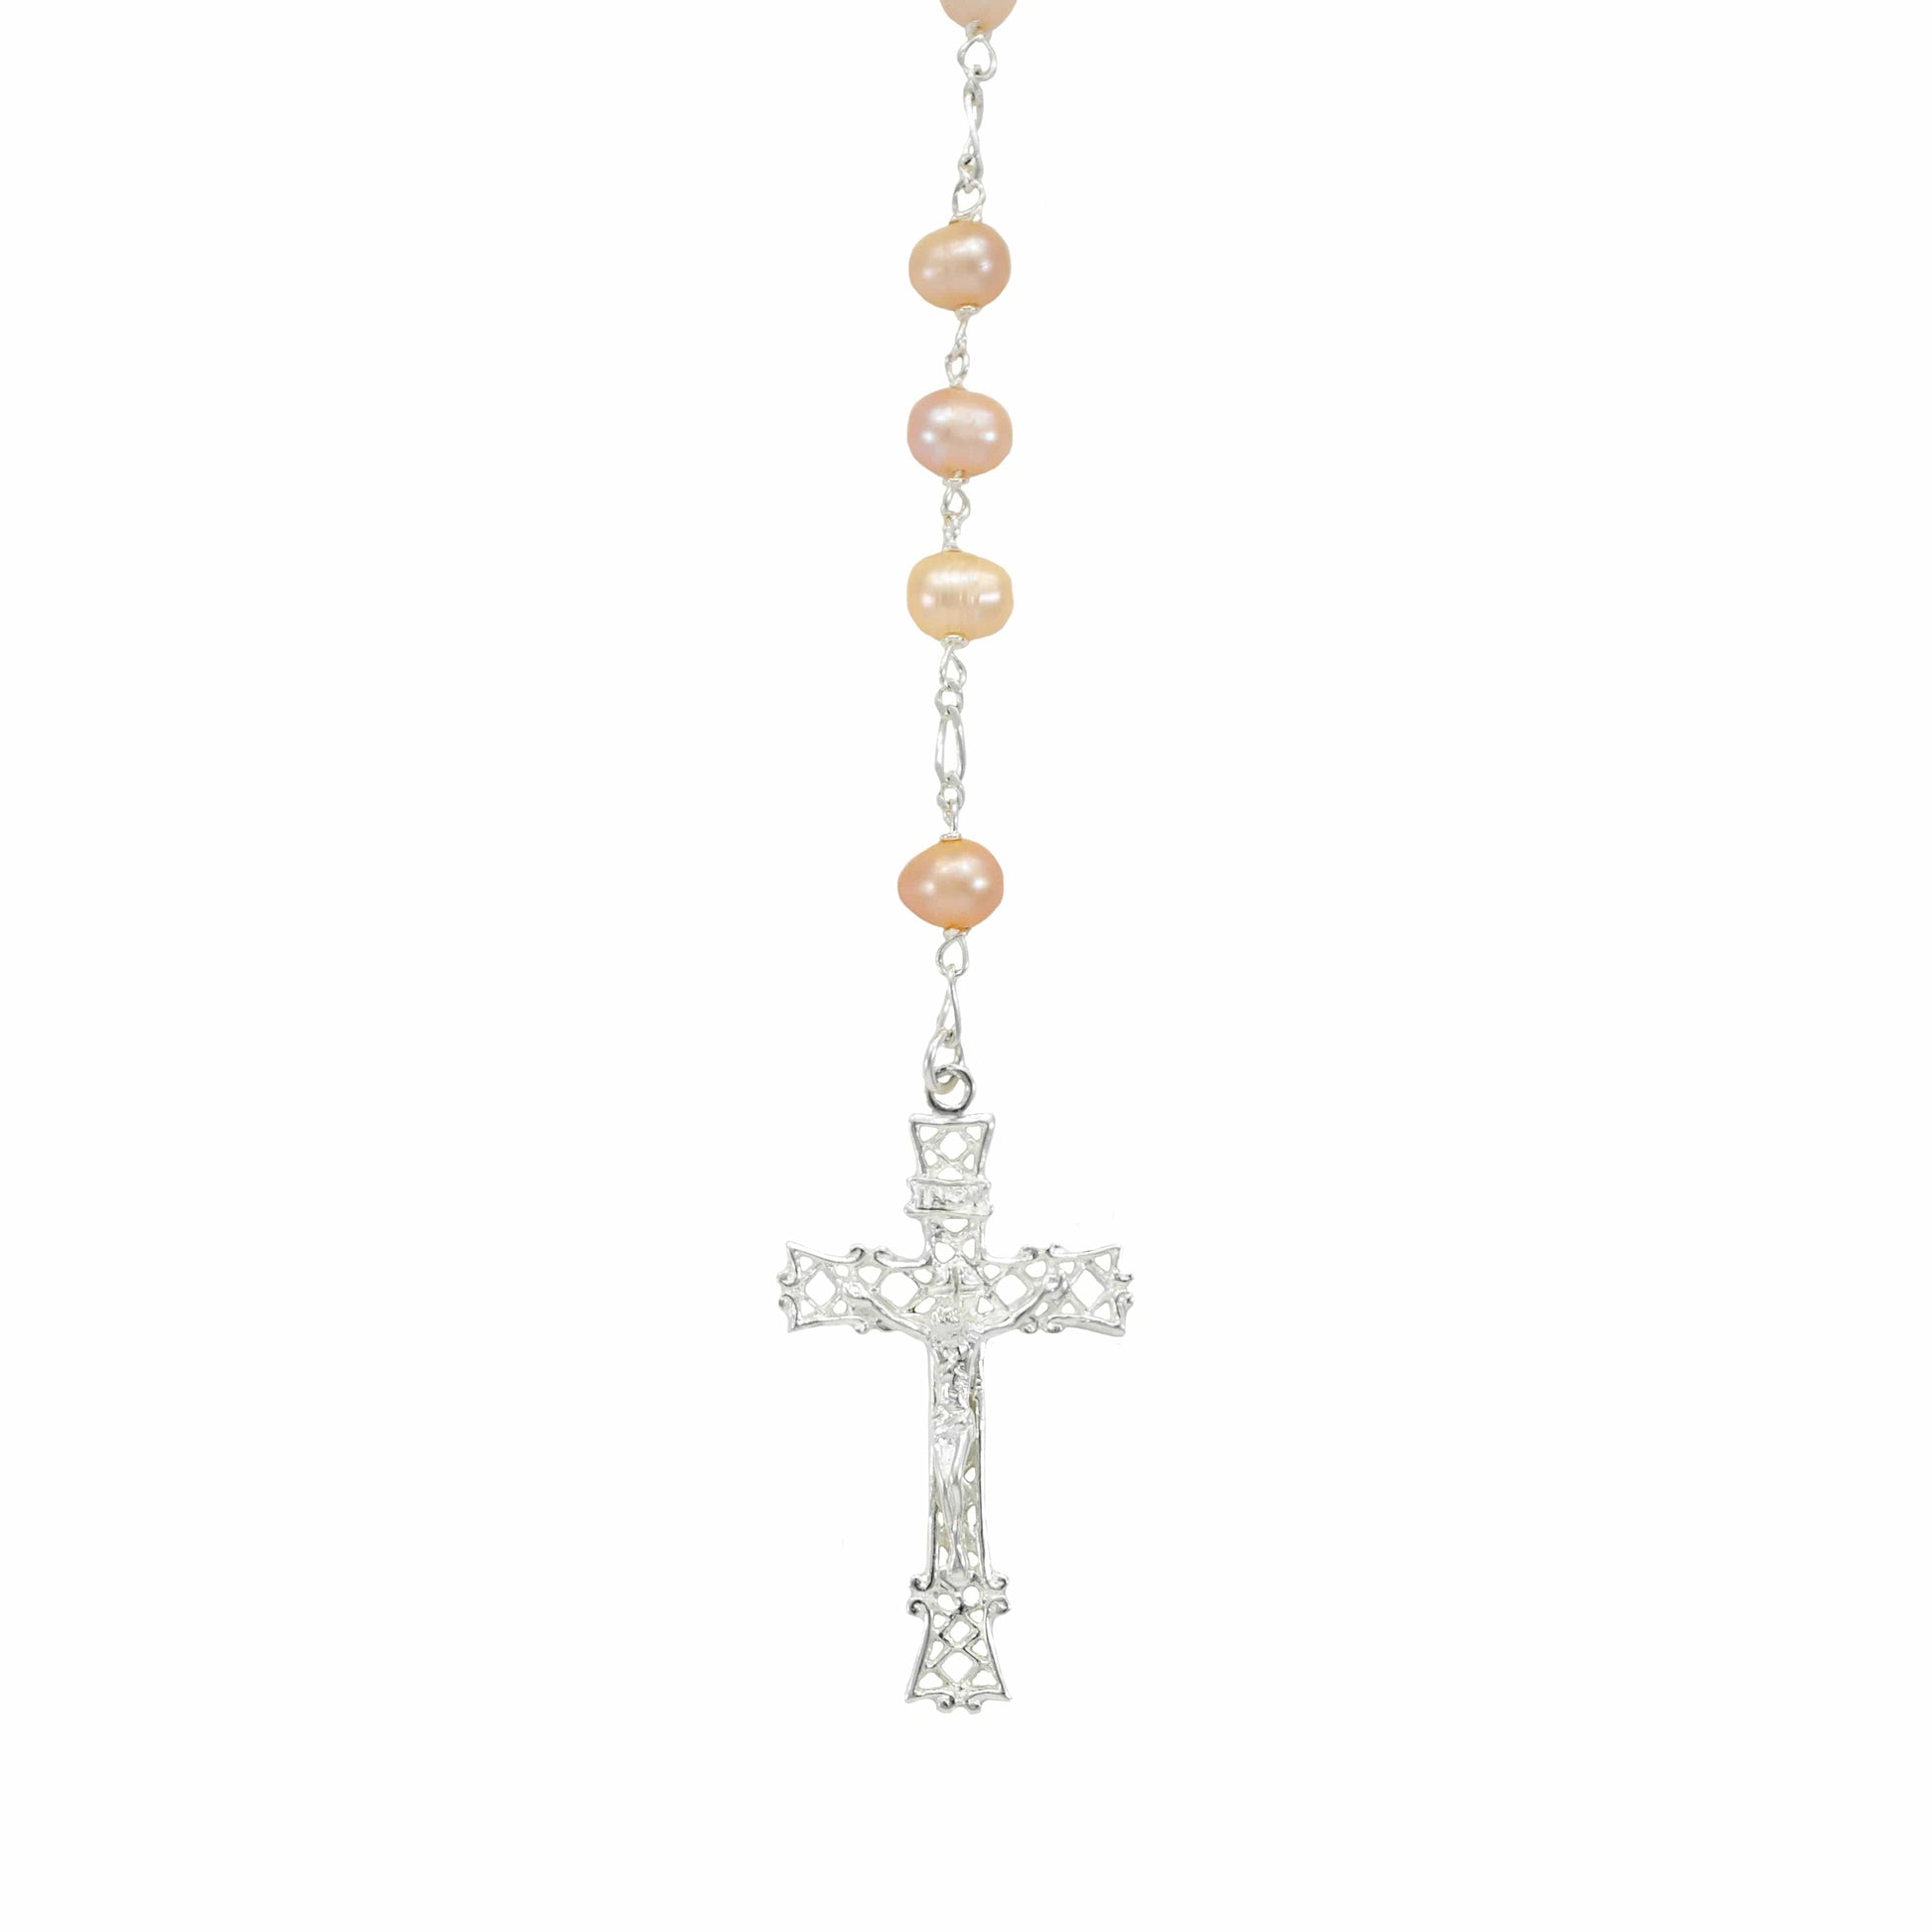 MONDO CATTOLICO Prayer Beads Sterling Silver Rosary with Lake Pearl Beads